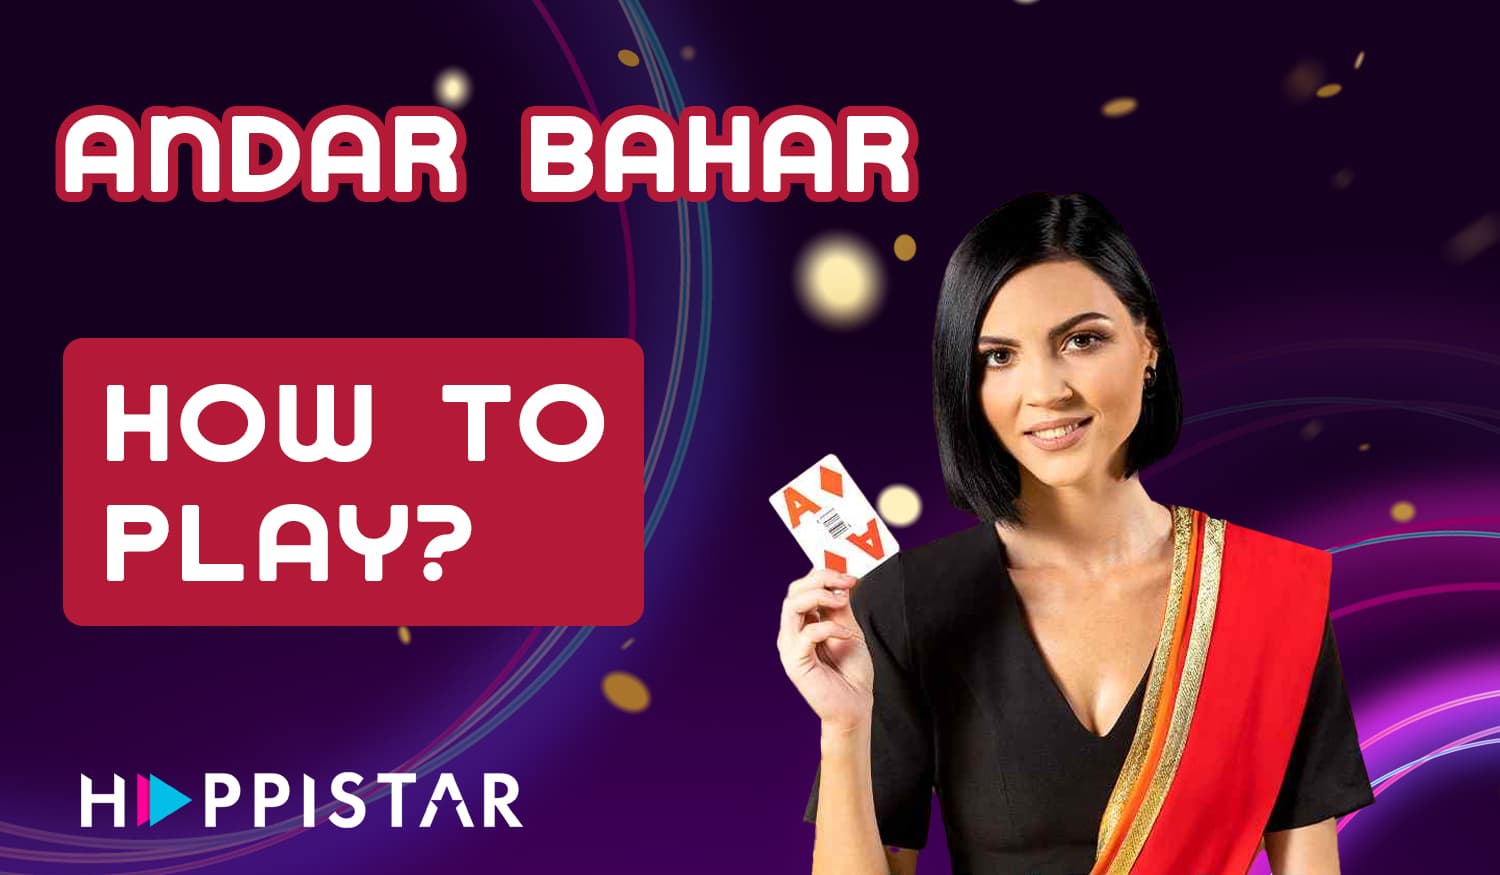 Step-by-step instructions for new users of online casino Happistar from India how to start playing Andar Bahar.